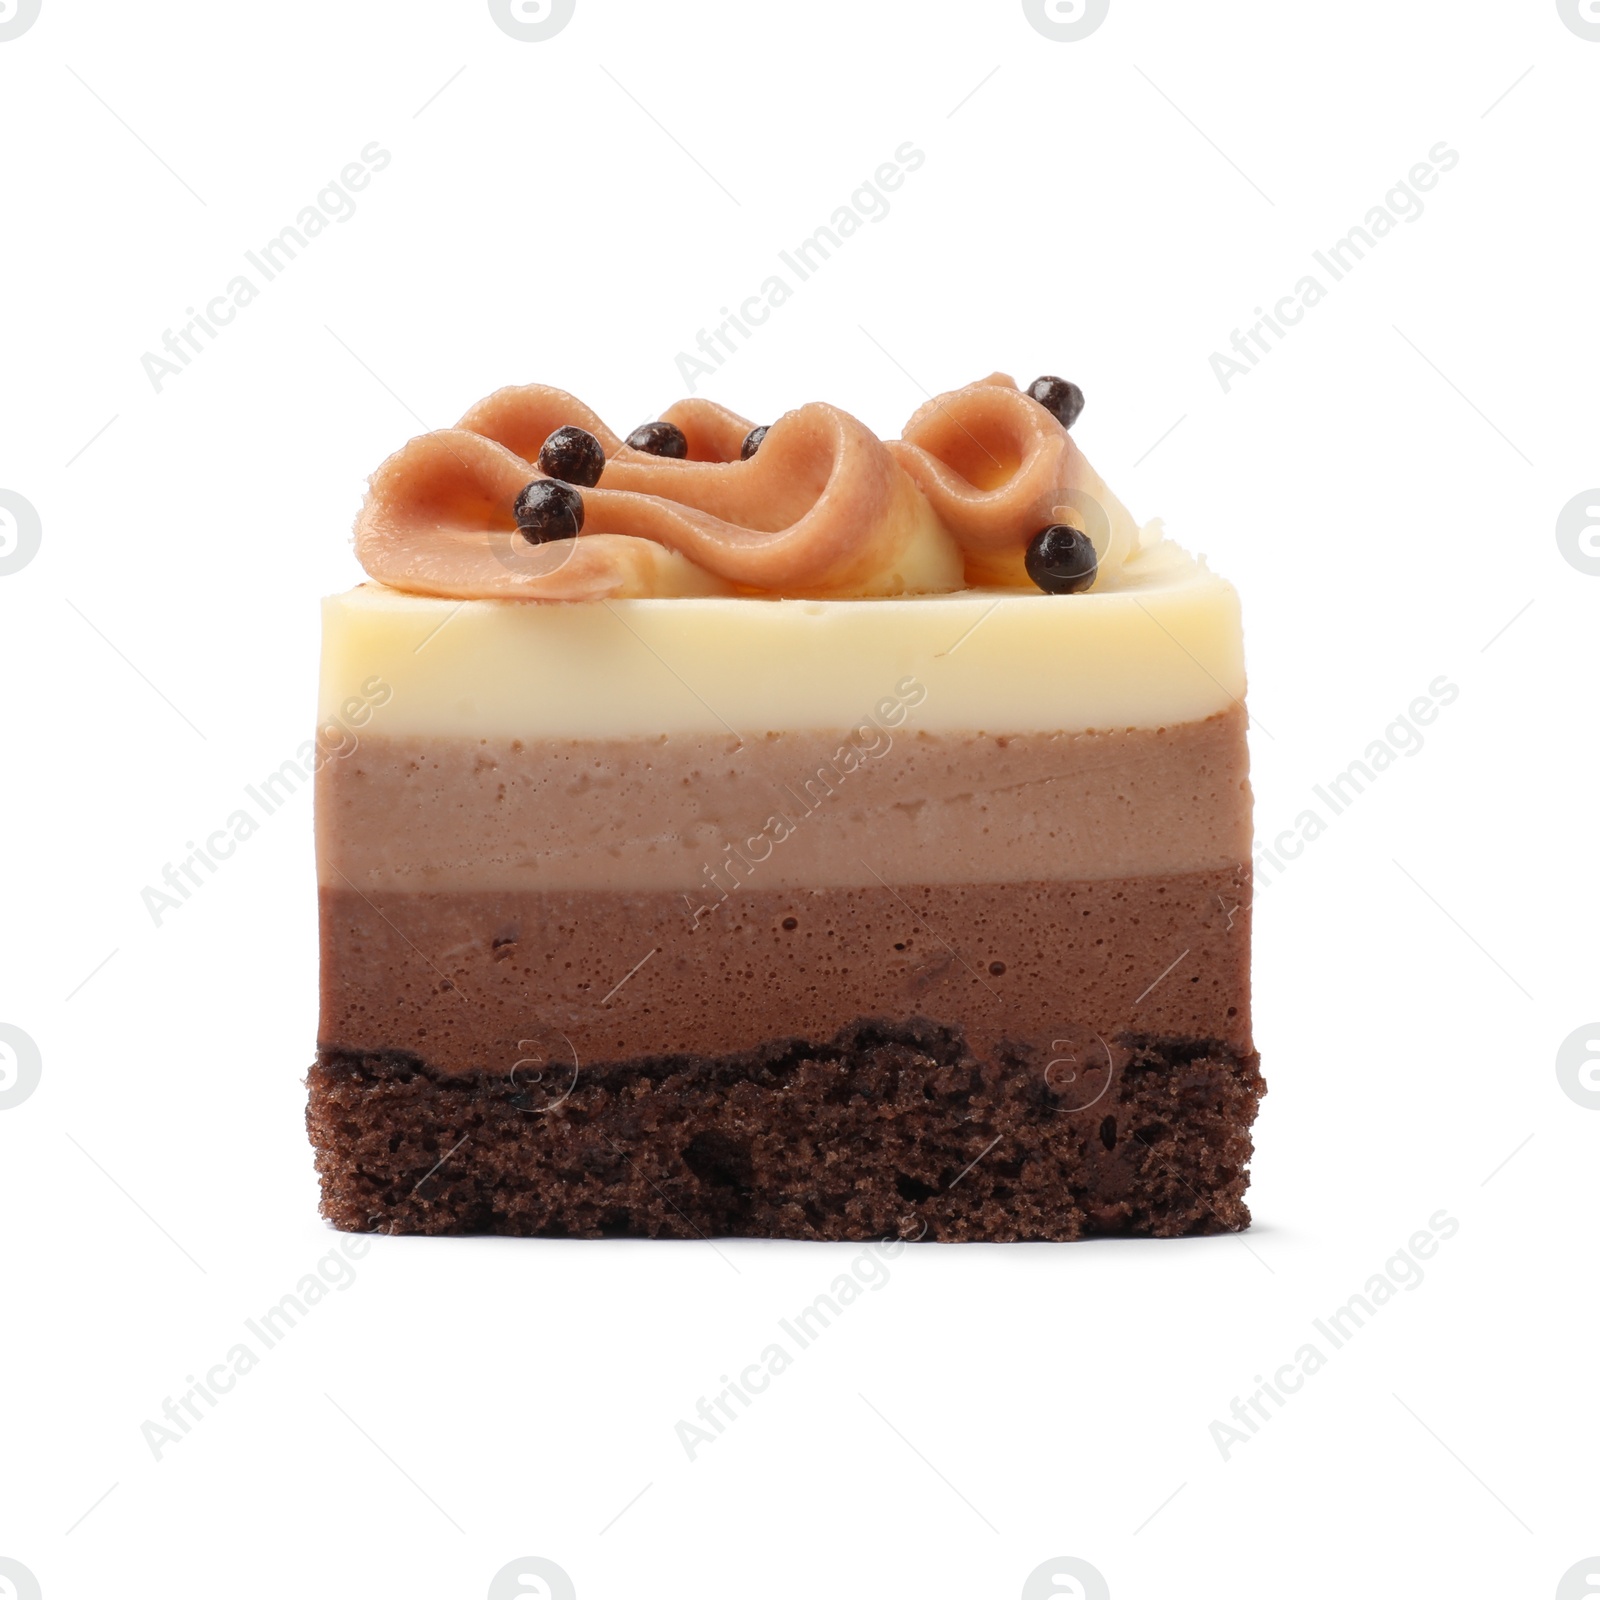 Photo of Piece of triple chocolate mousse cake on white background